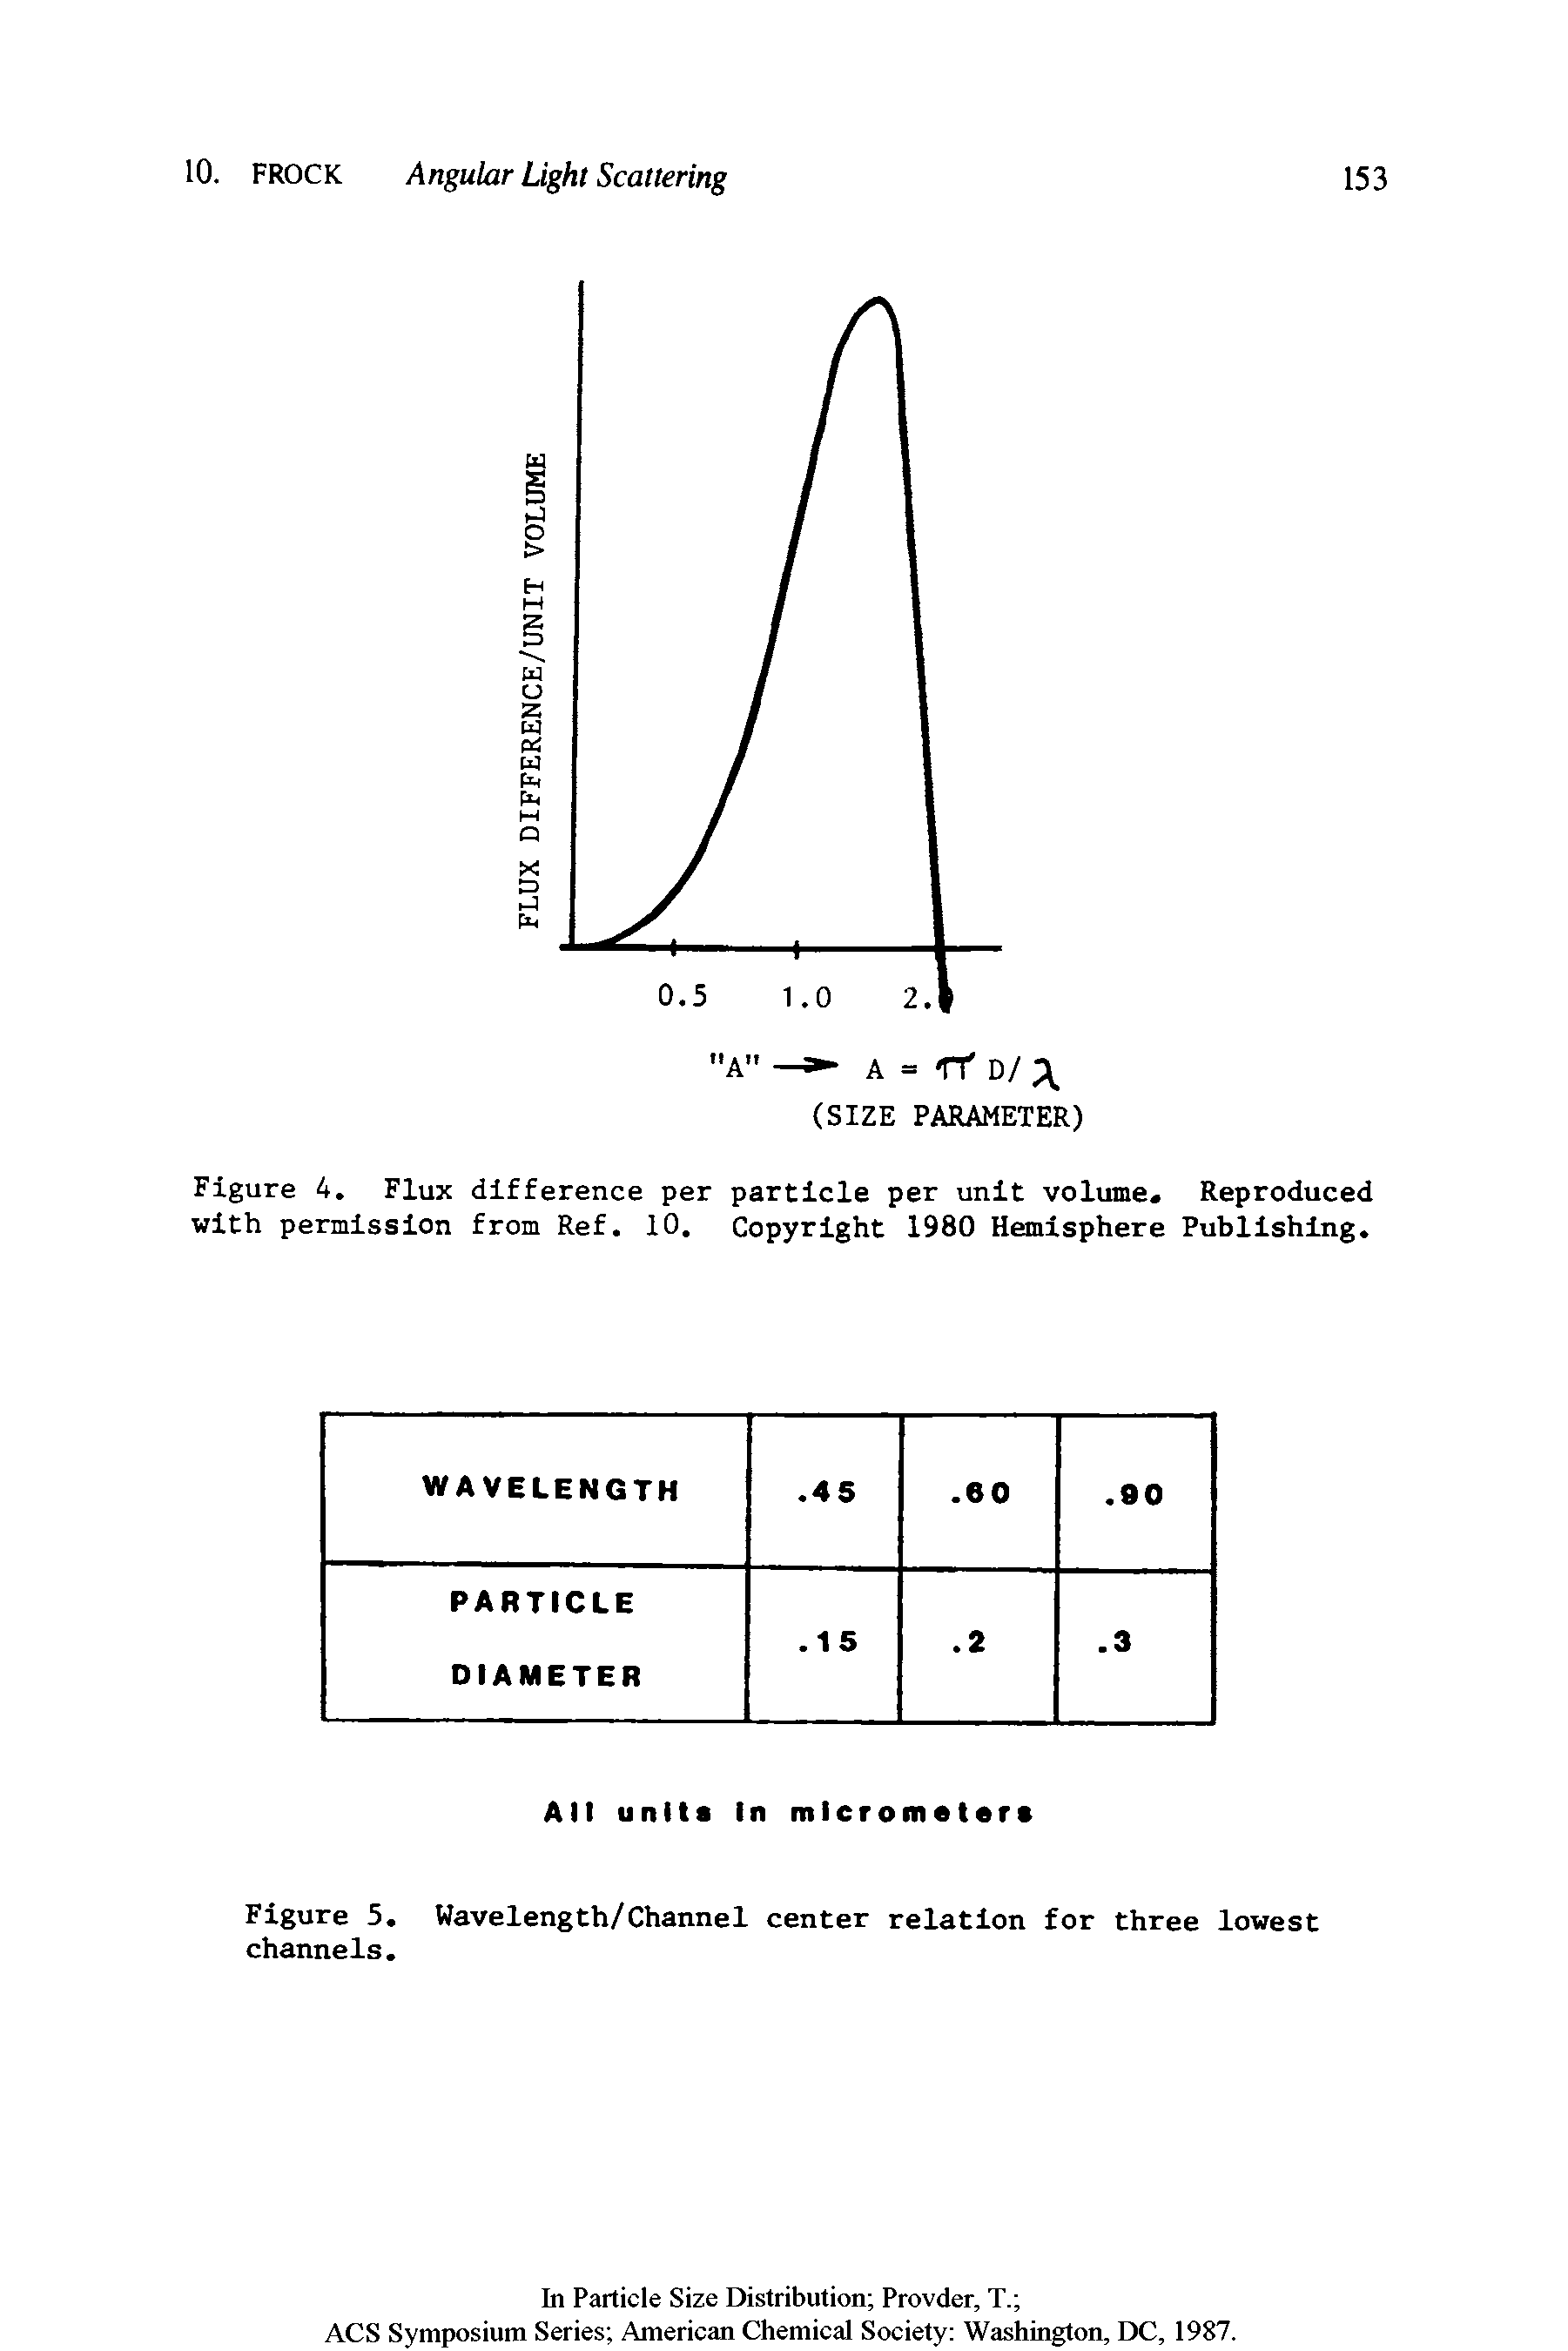 Figure 4. Flux difference per particle per unit volume. Reproduced with permission from Ref. 10. Copyright 1980 Hemisphere Publishing.